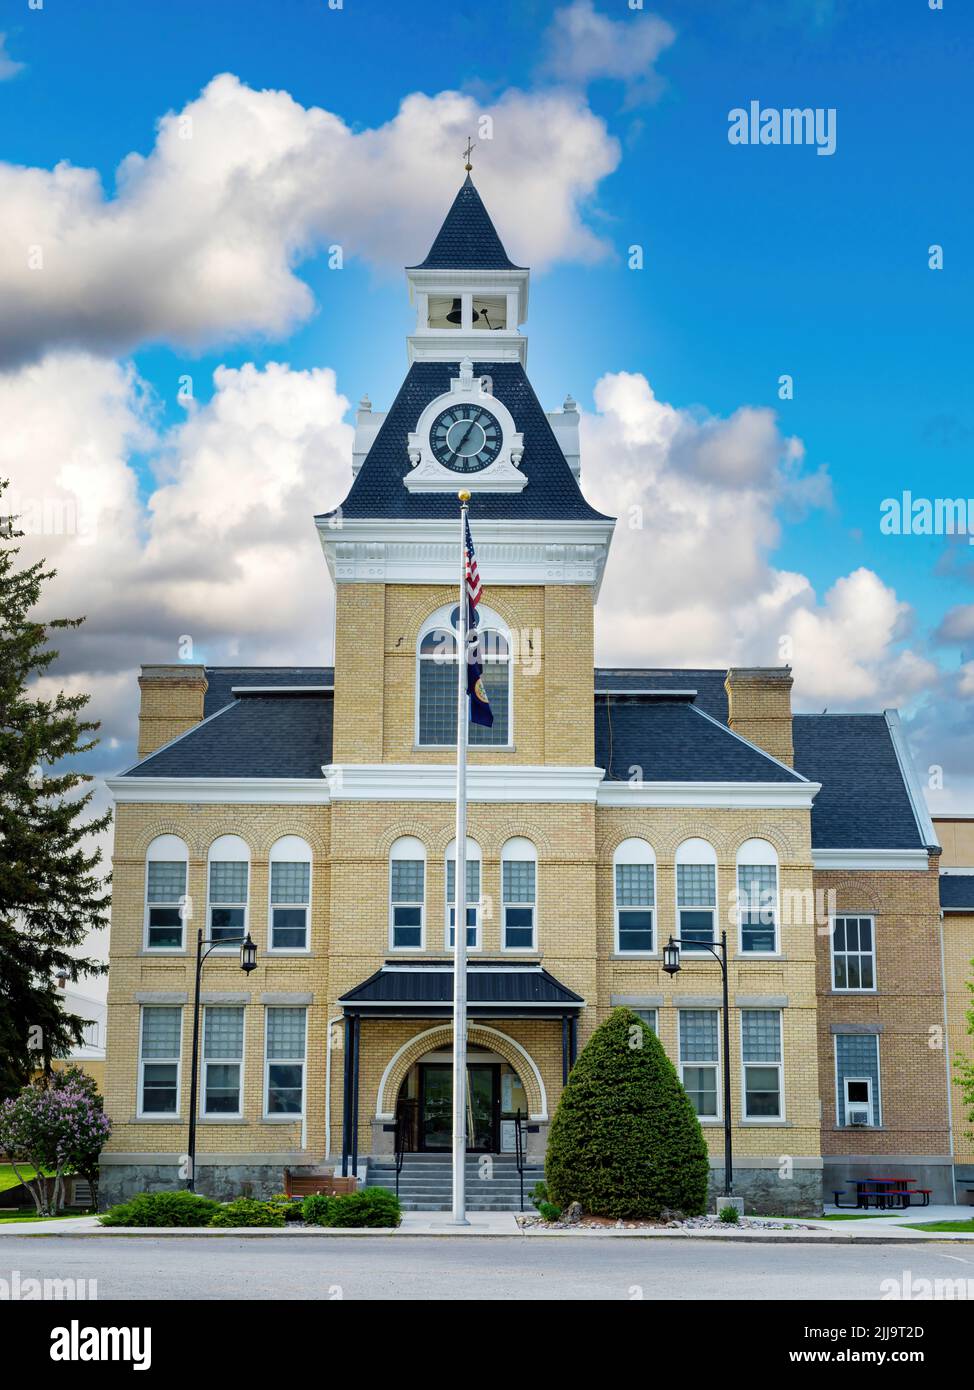 Downtown Dillon Montana courthouse on a cloudy day Stock Photo